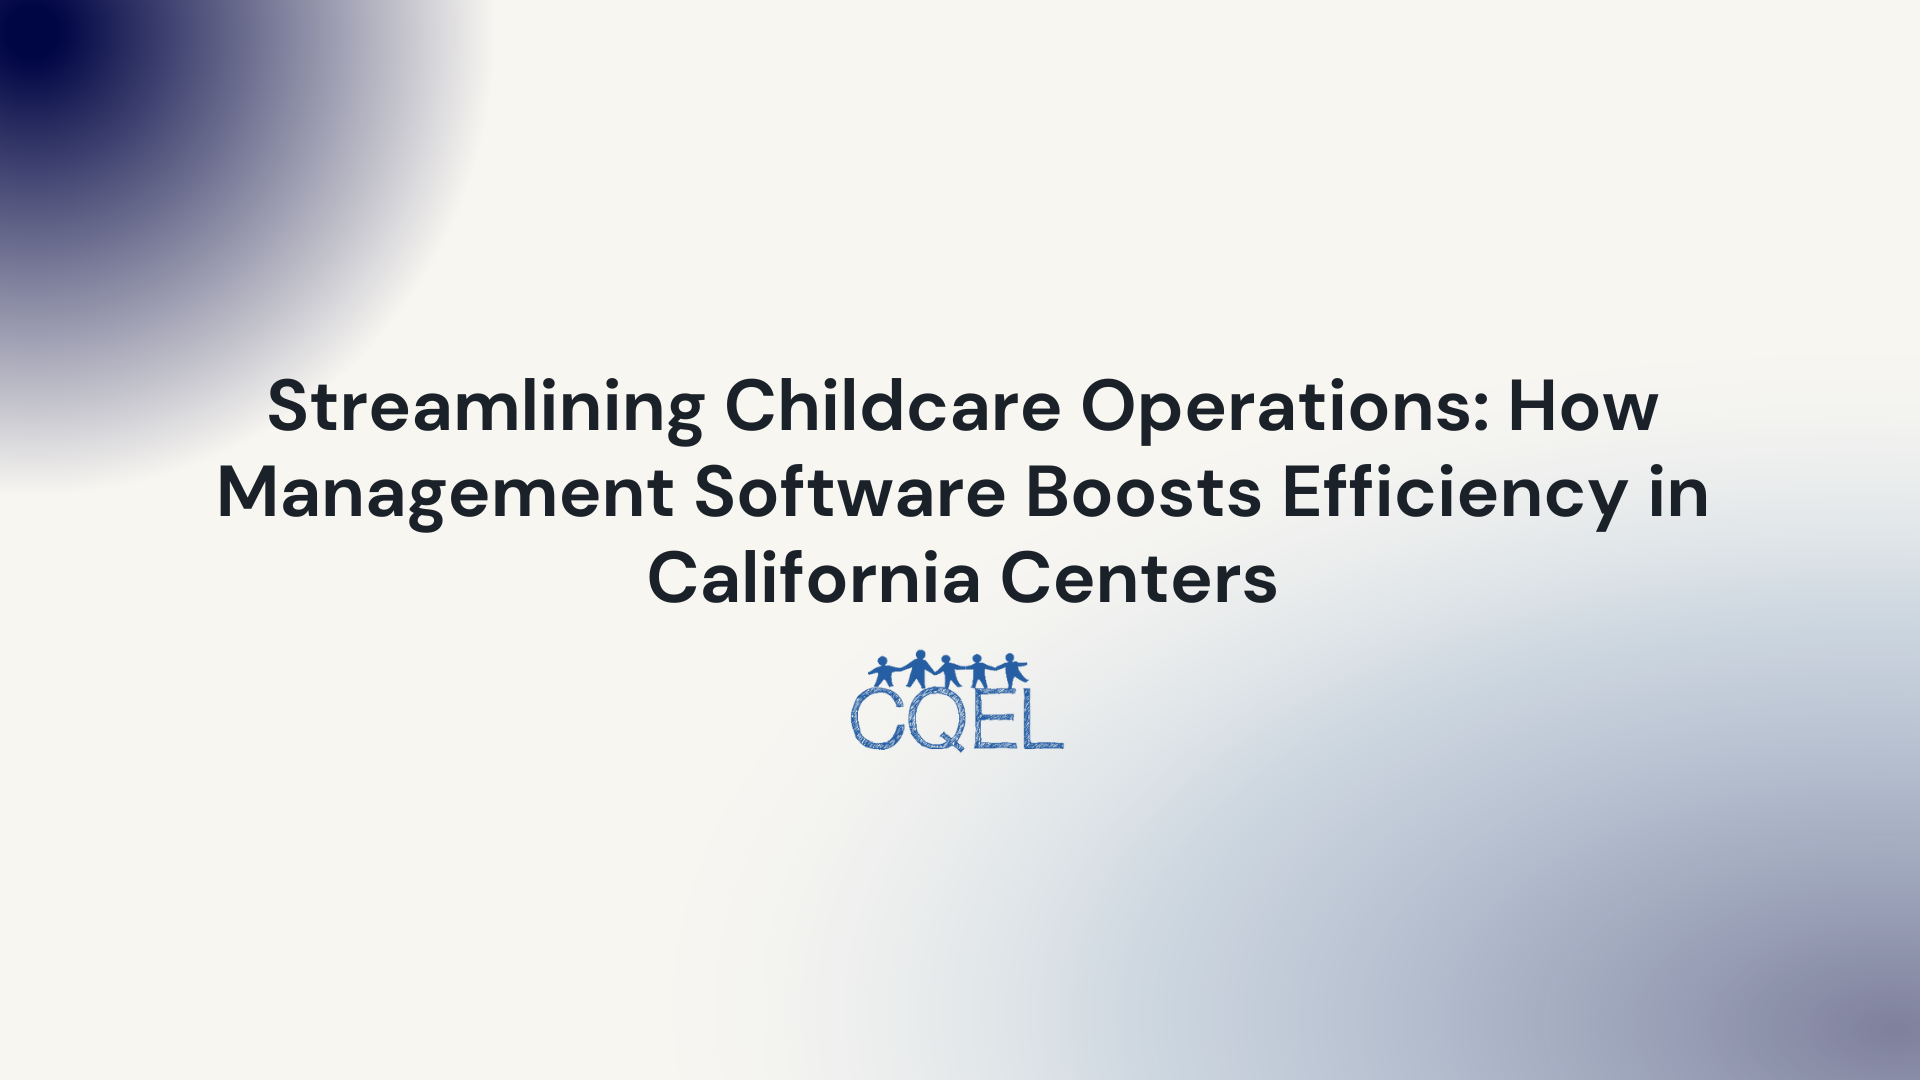 Streamlining Childcare Operations: How Management Software Boosts Efficiency in California Centers